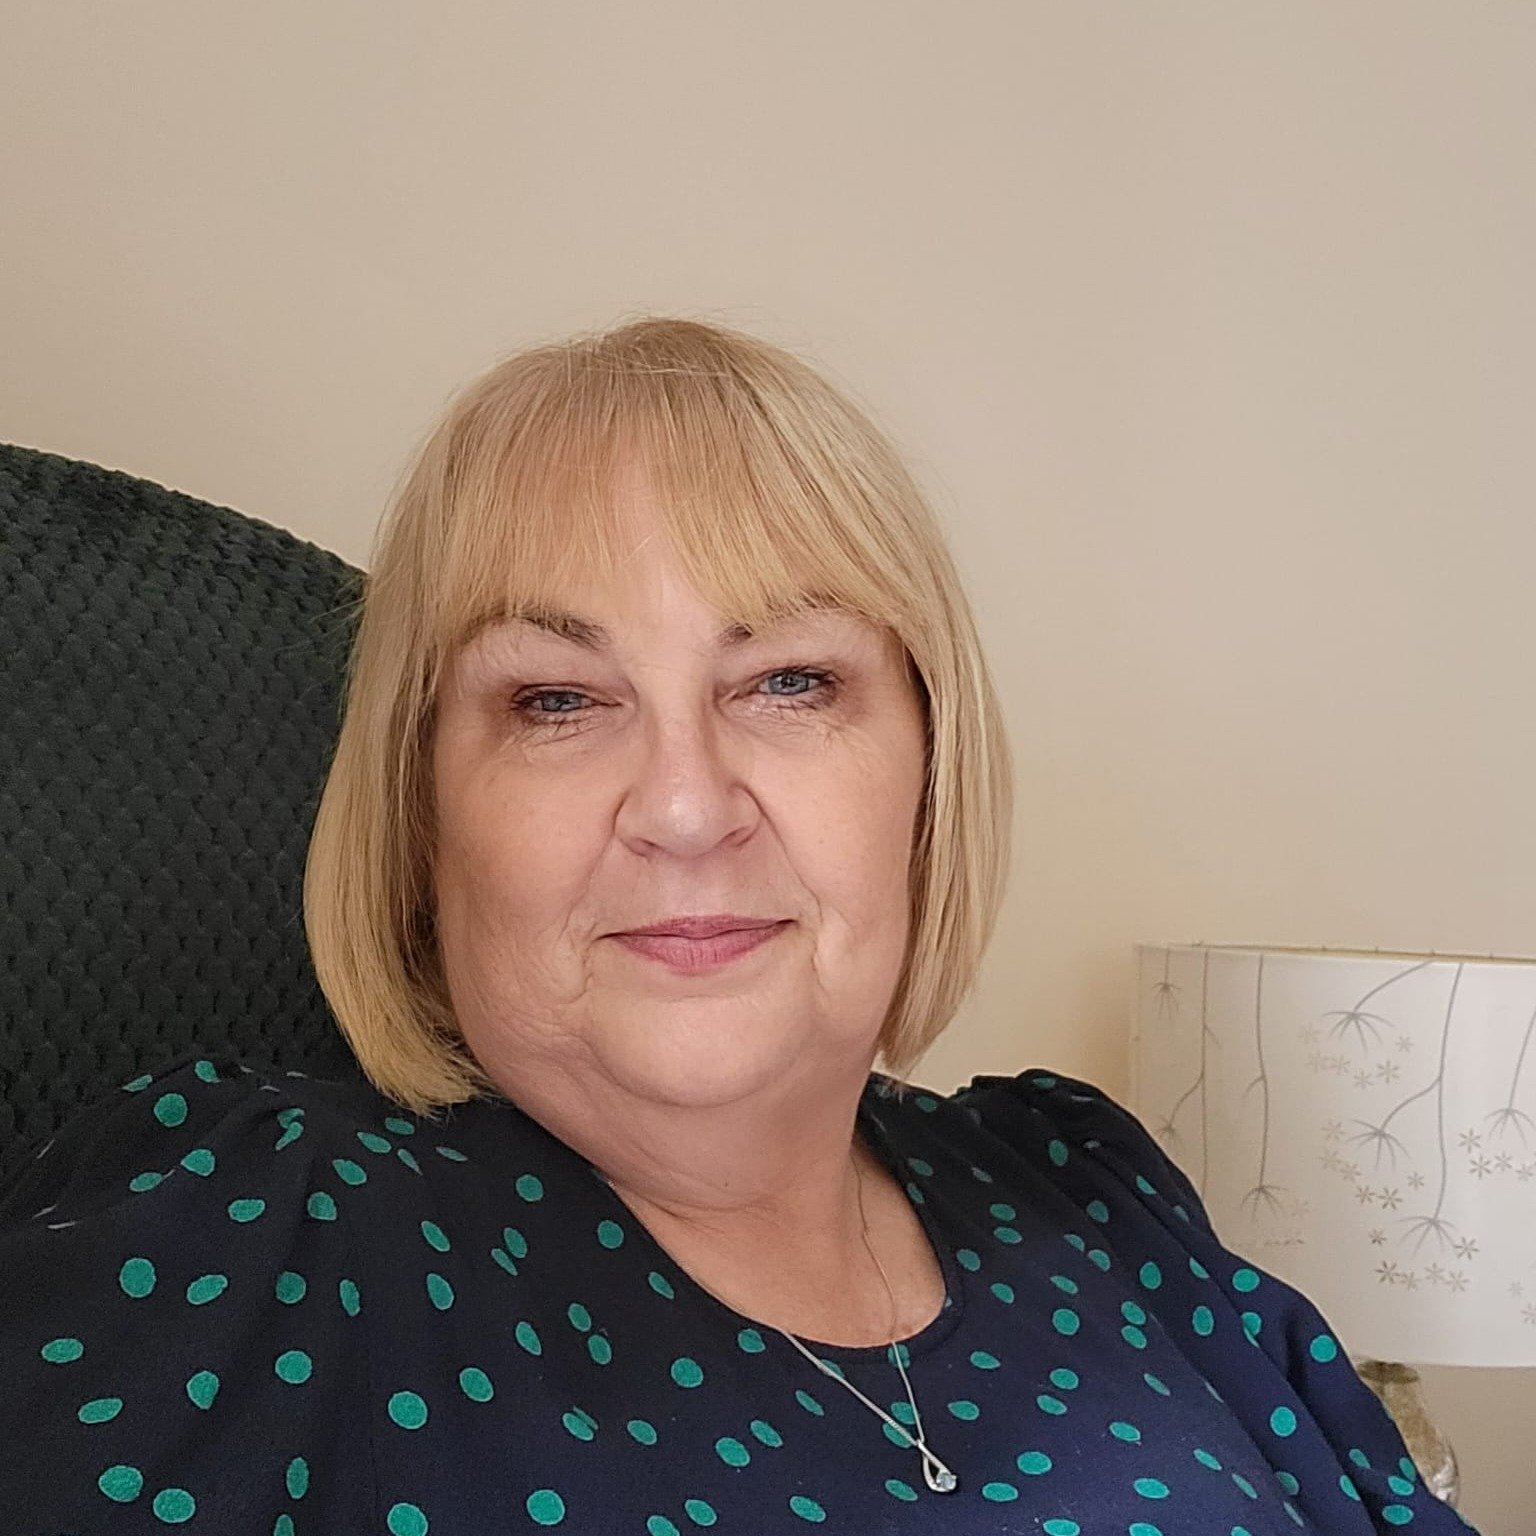 Exciting News from Northbrooke House! 🎉

We're thrilled to welcome Debbie Thunder as the new Registered Manager of Northbrooke House. With extensive experience in health and social care, including in dementia care and management roles, Debbie is per